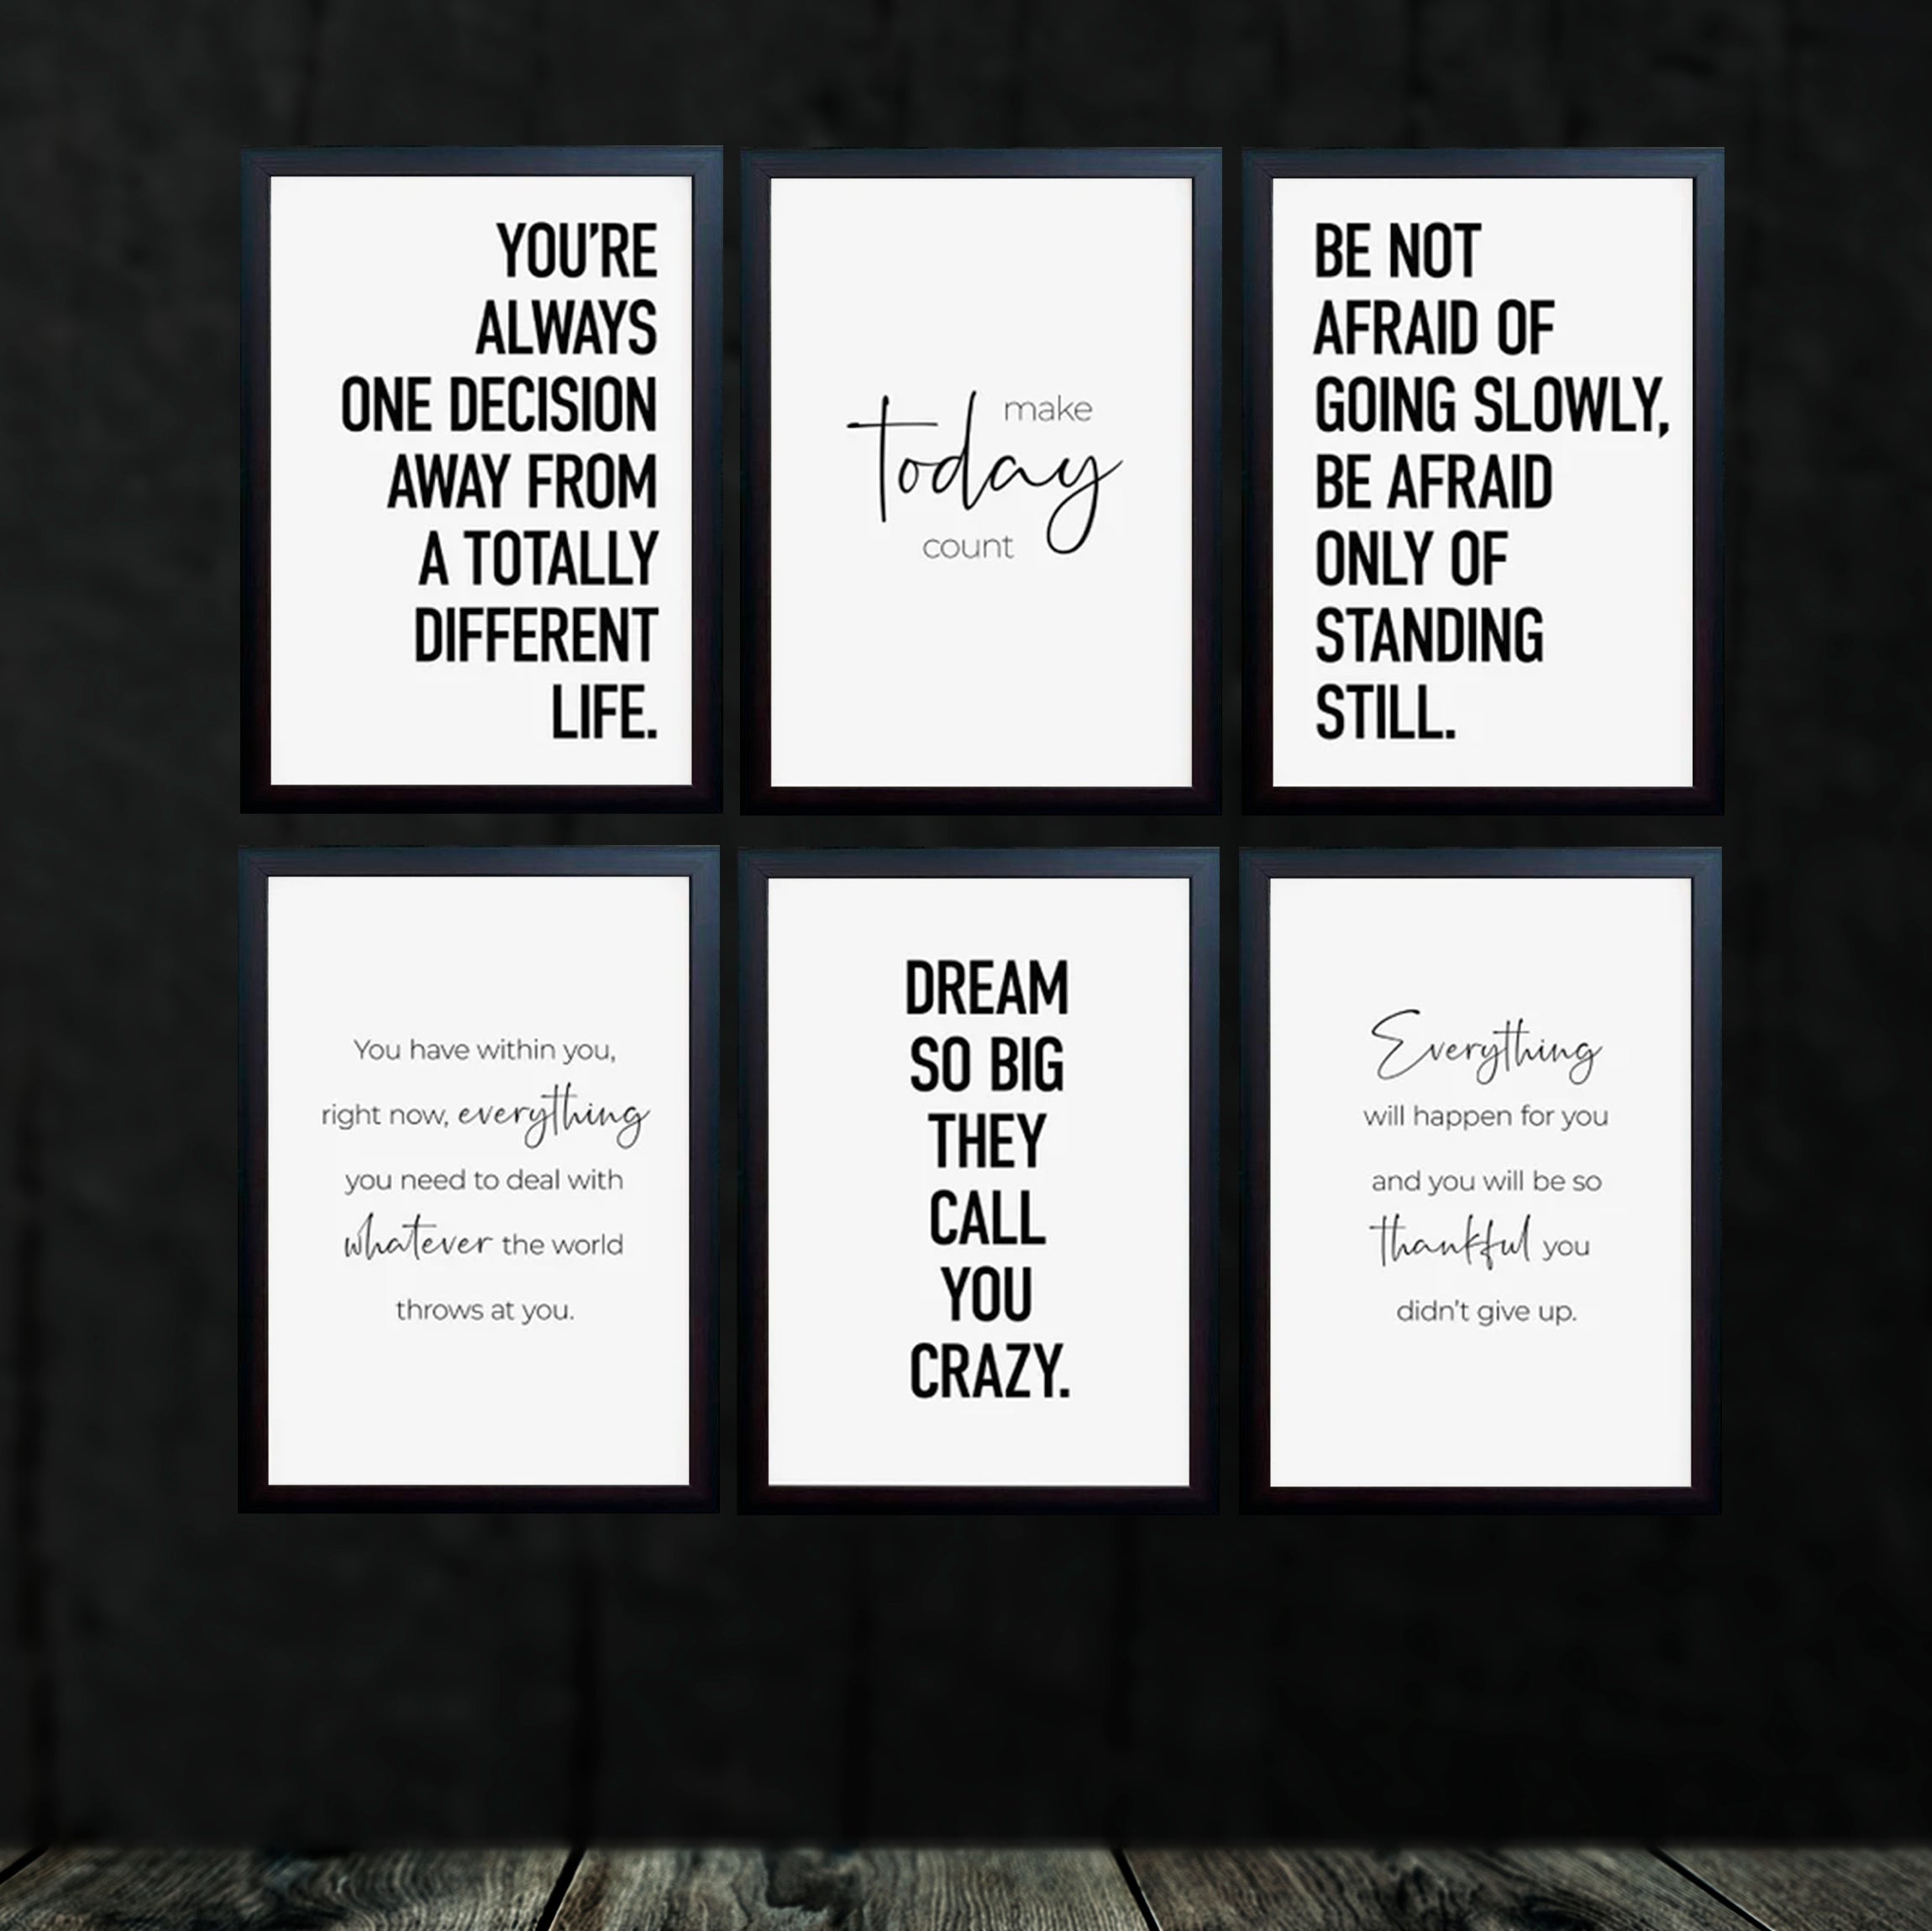 Work Motivational Qoutes For Office / Companies Set of 6 frames